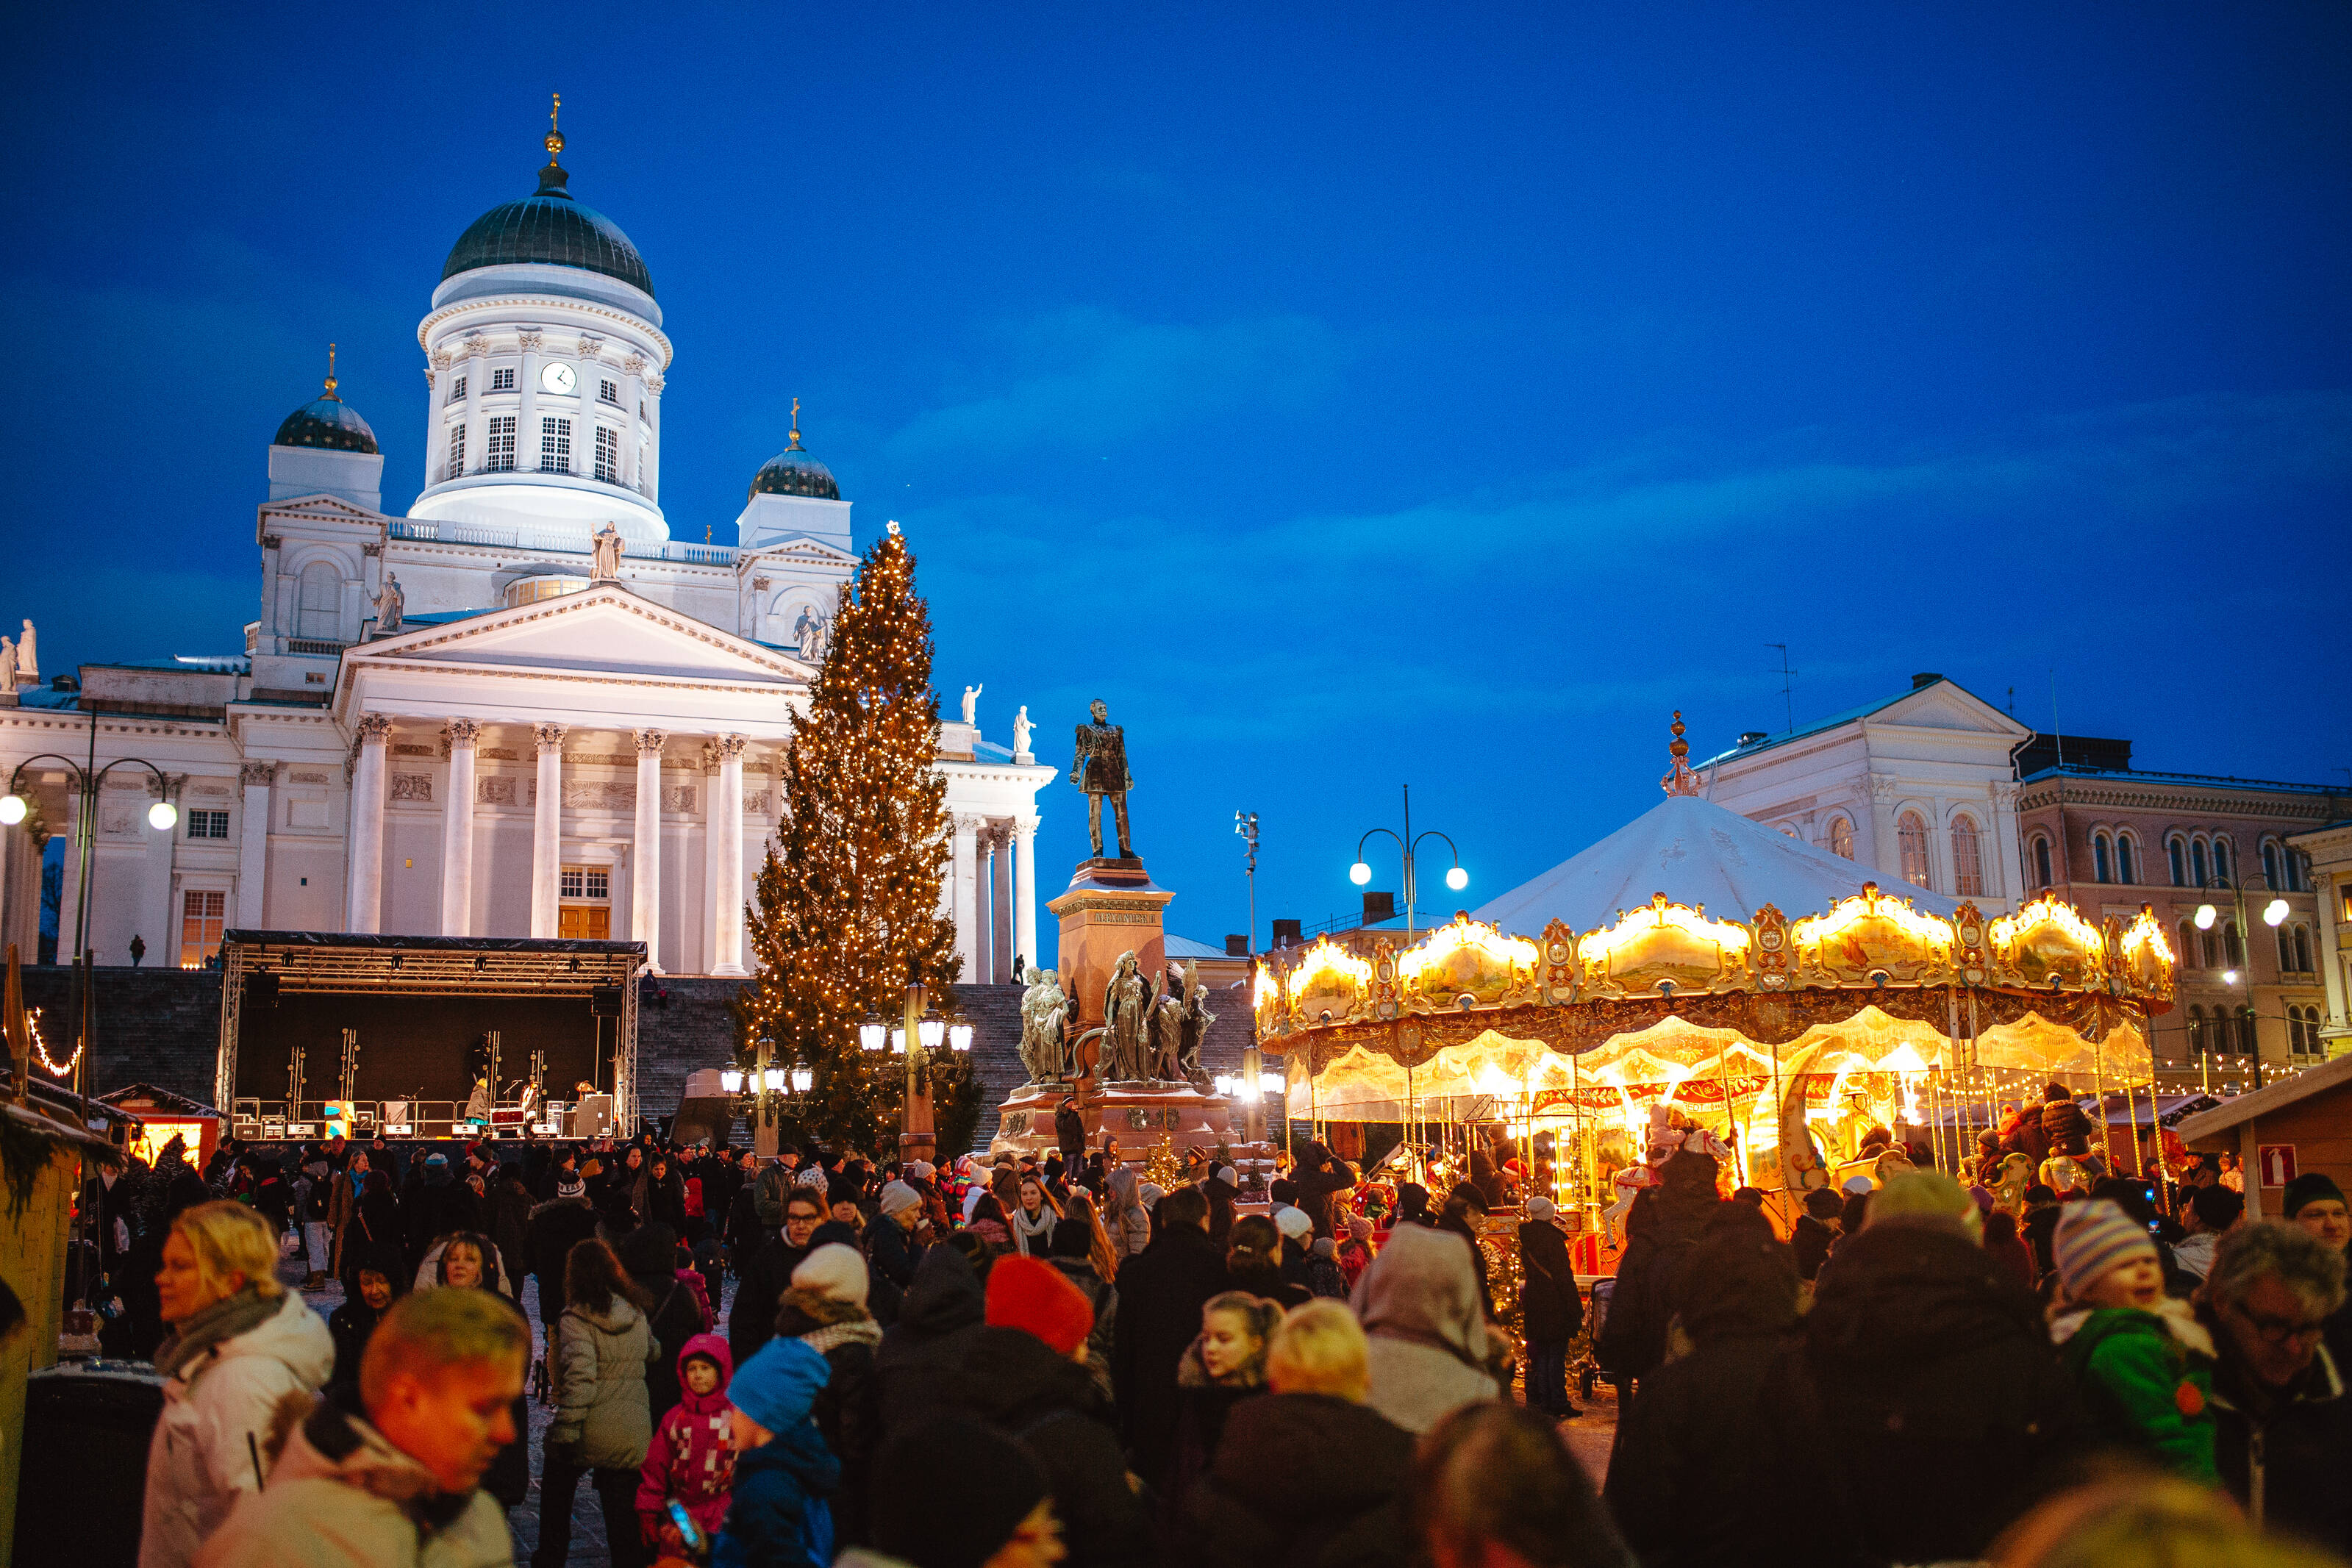 Christmas market at the front of the Senate square in Helsinki